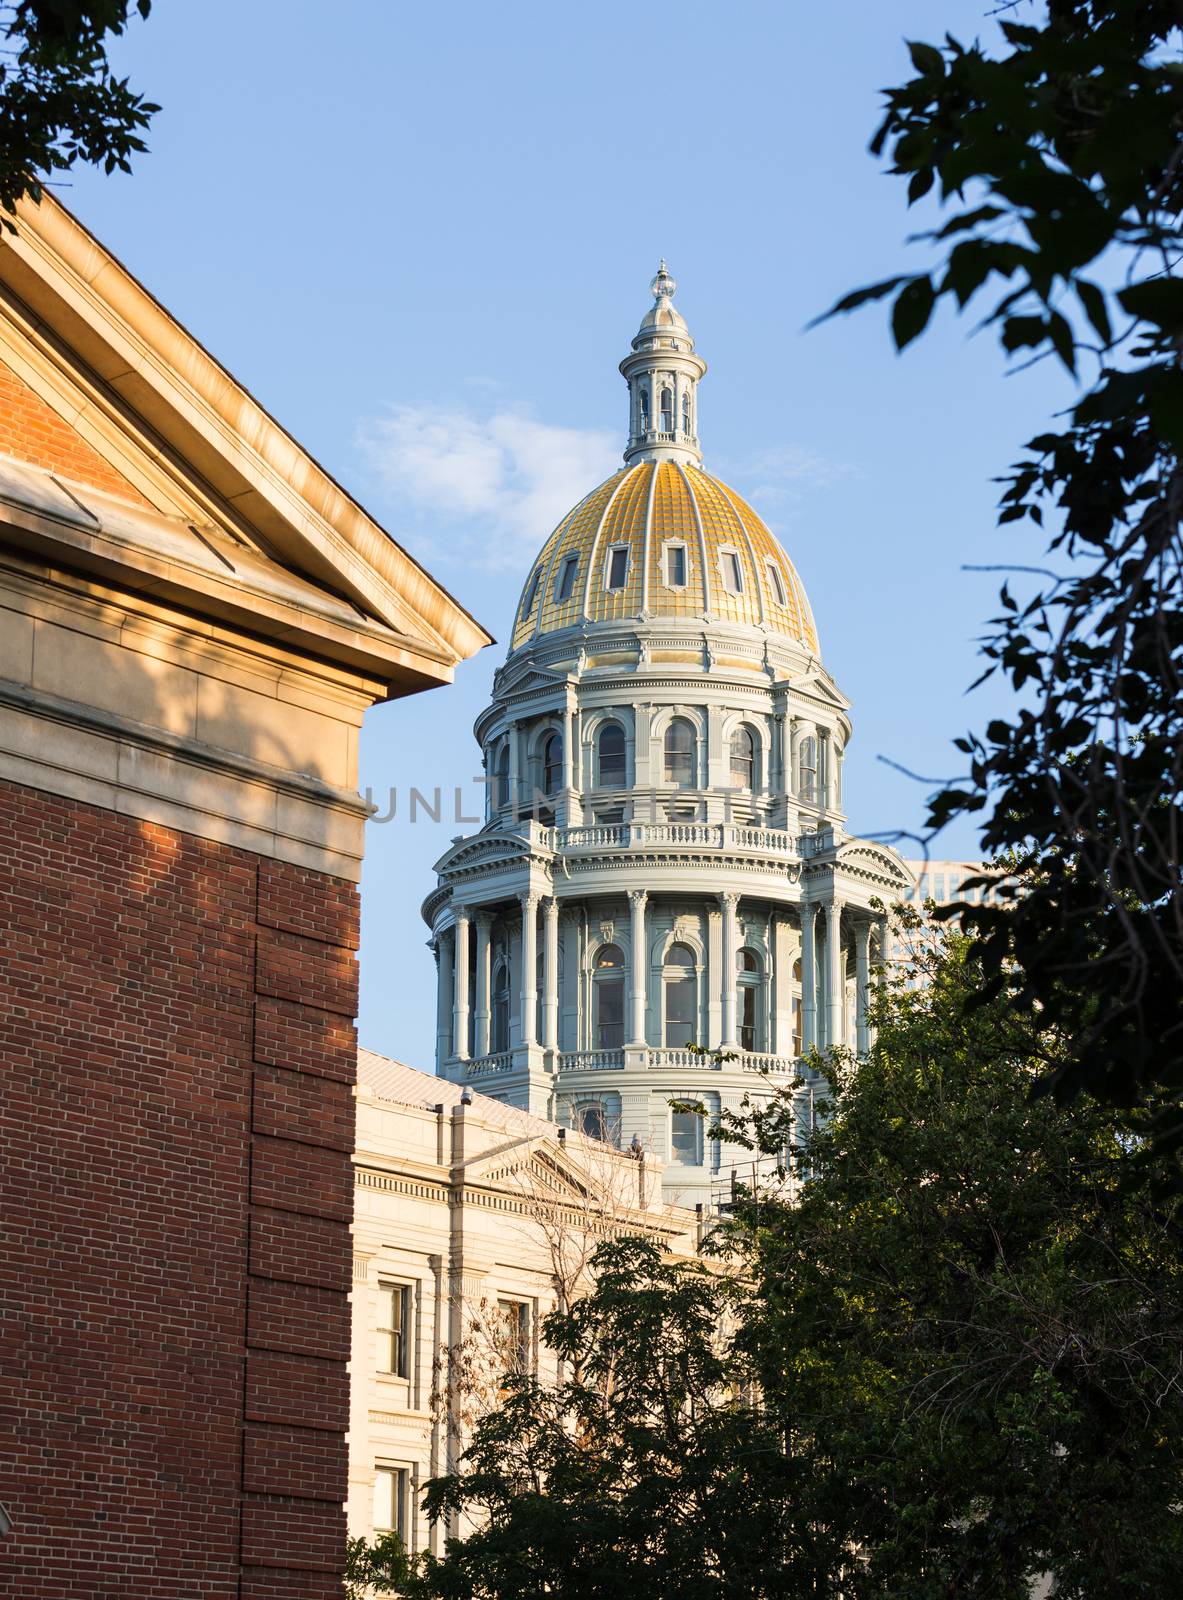 The gold leaf covered dome of the State Capitol Dome in Denver Colorado shortly after sunrise